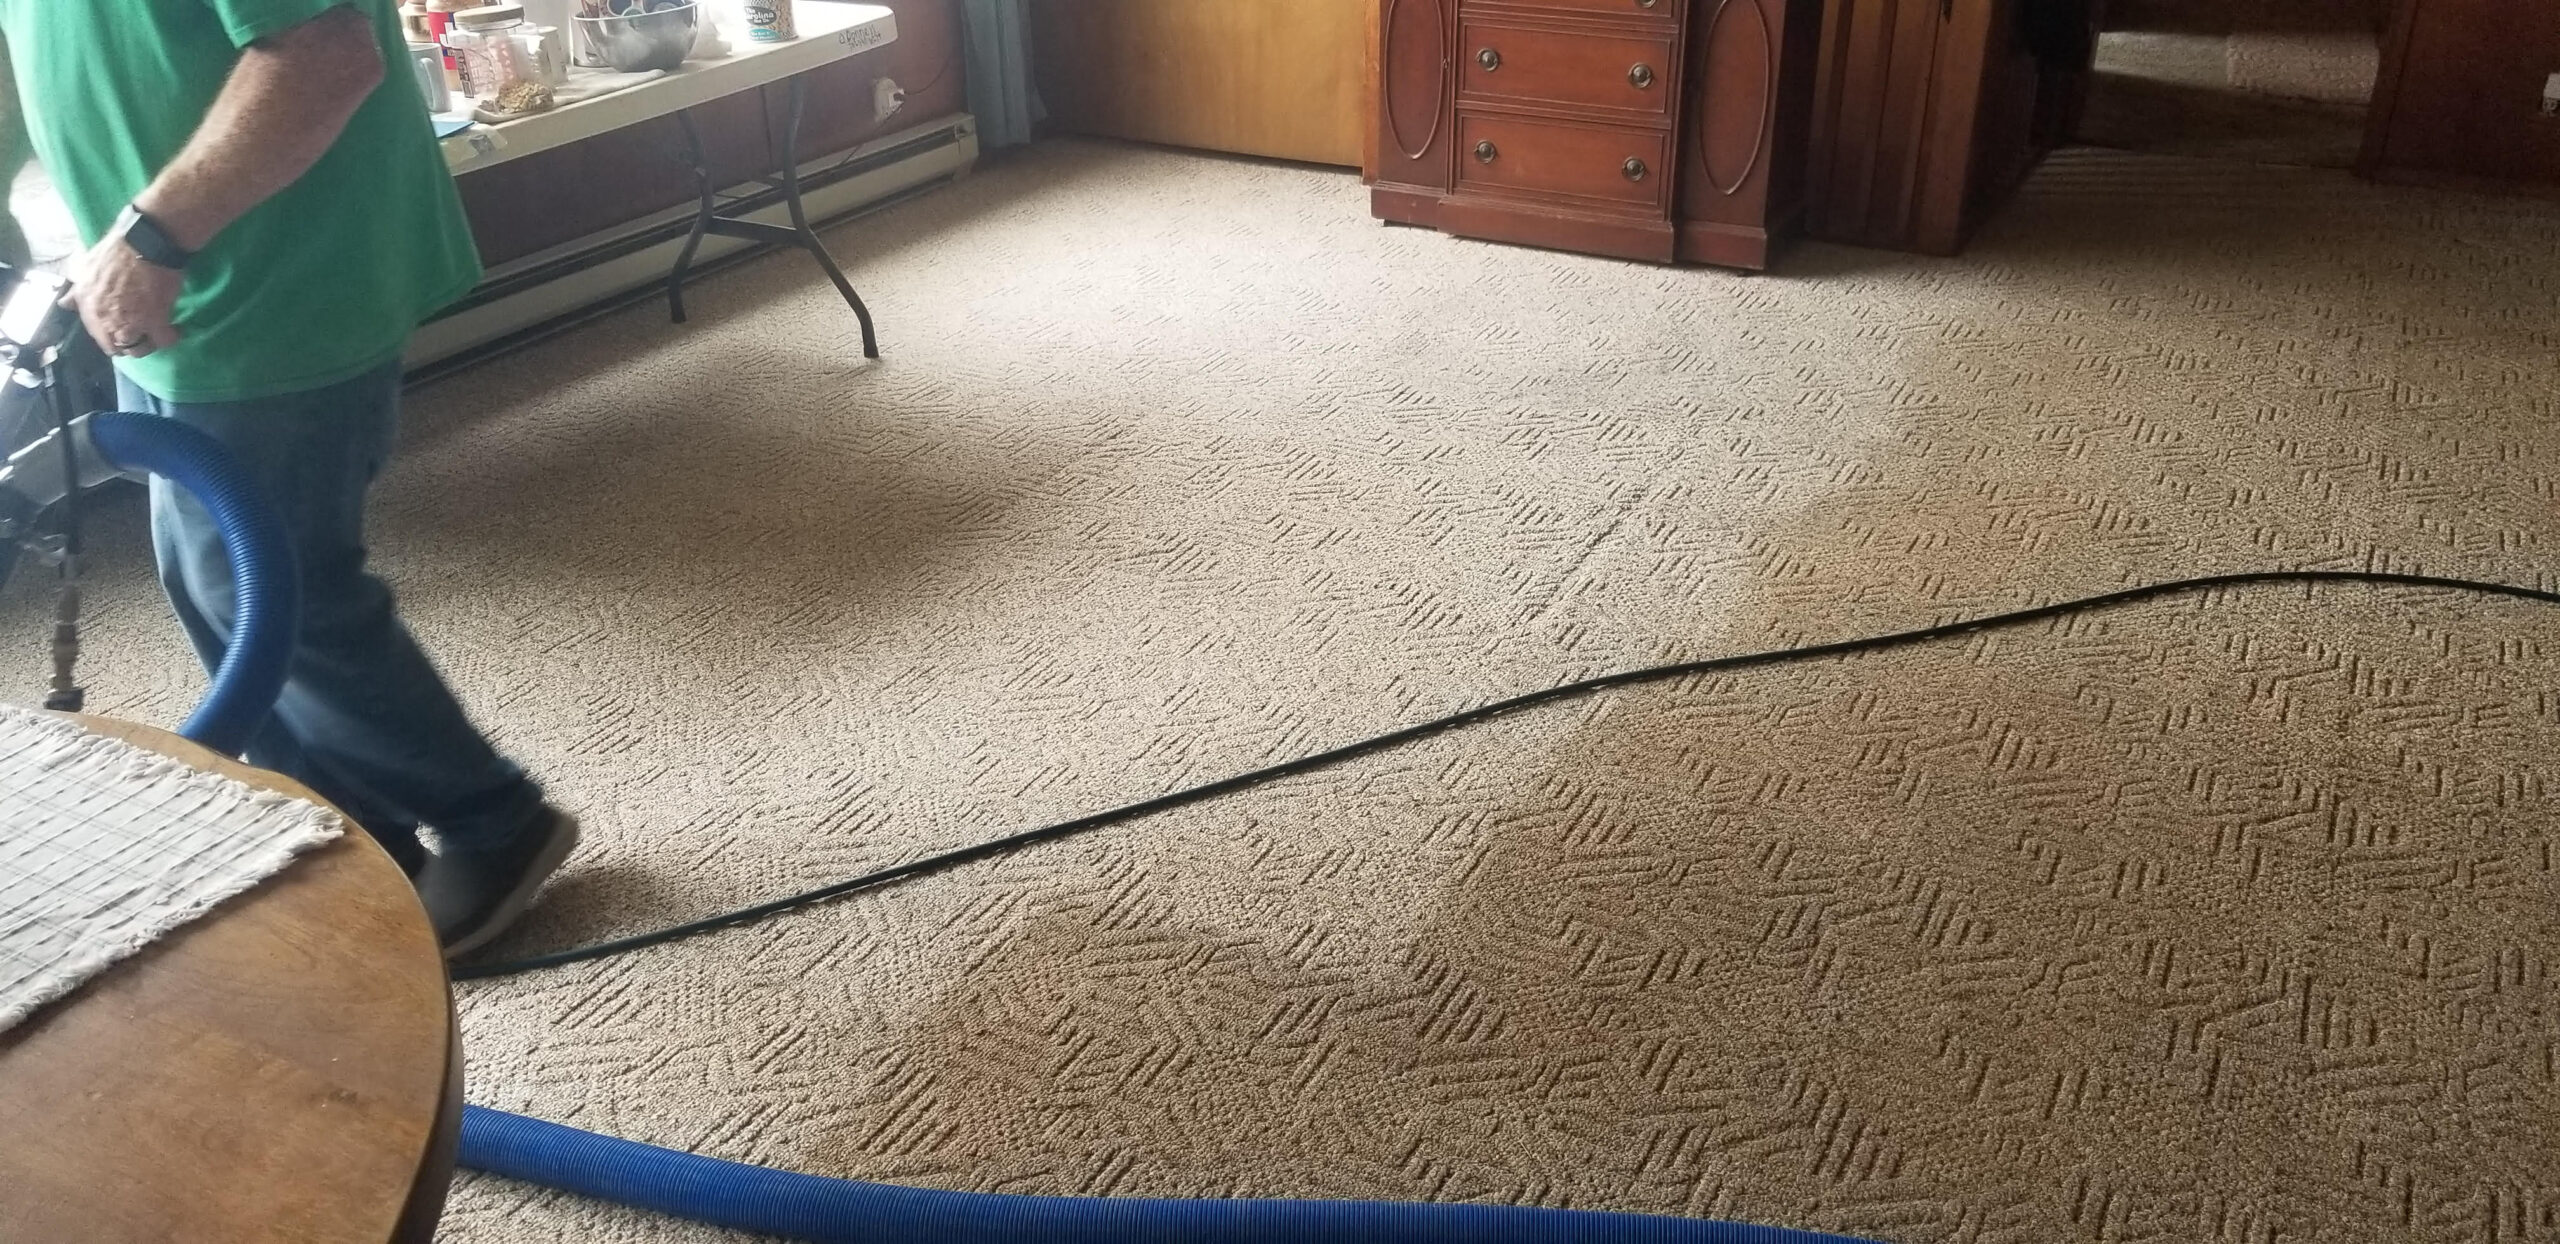 TJ's Carpet Cleaning - serving Brookings, Gold Beach, and Crescent City